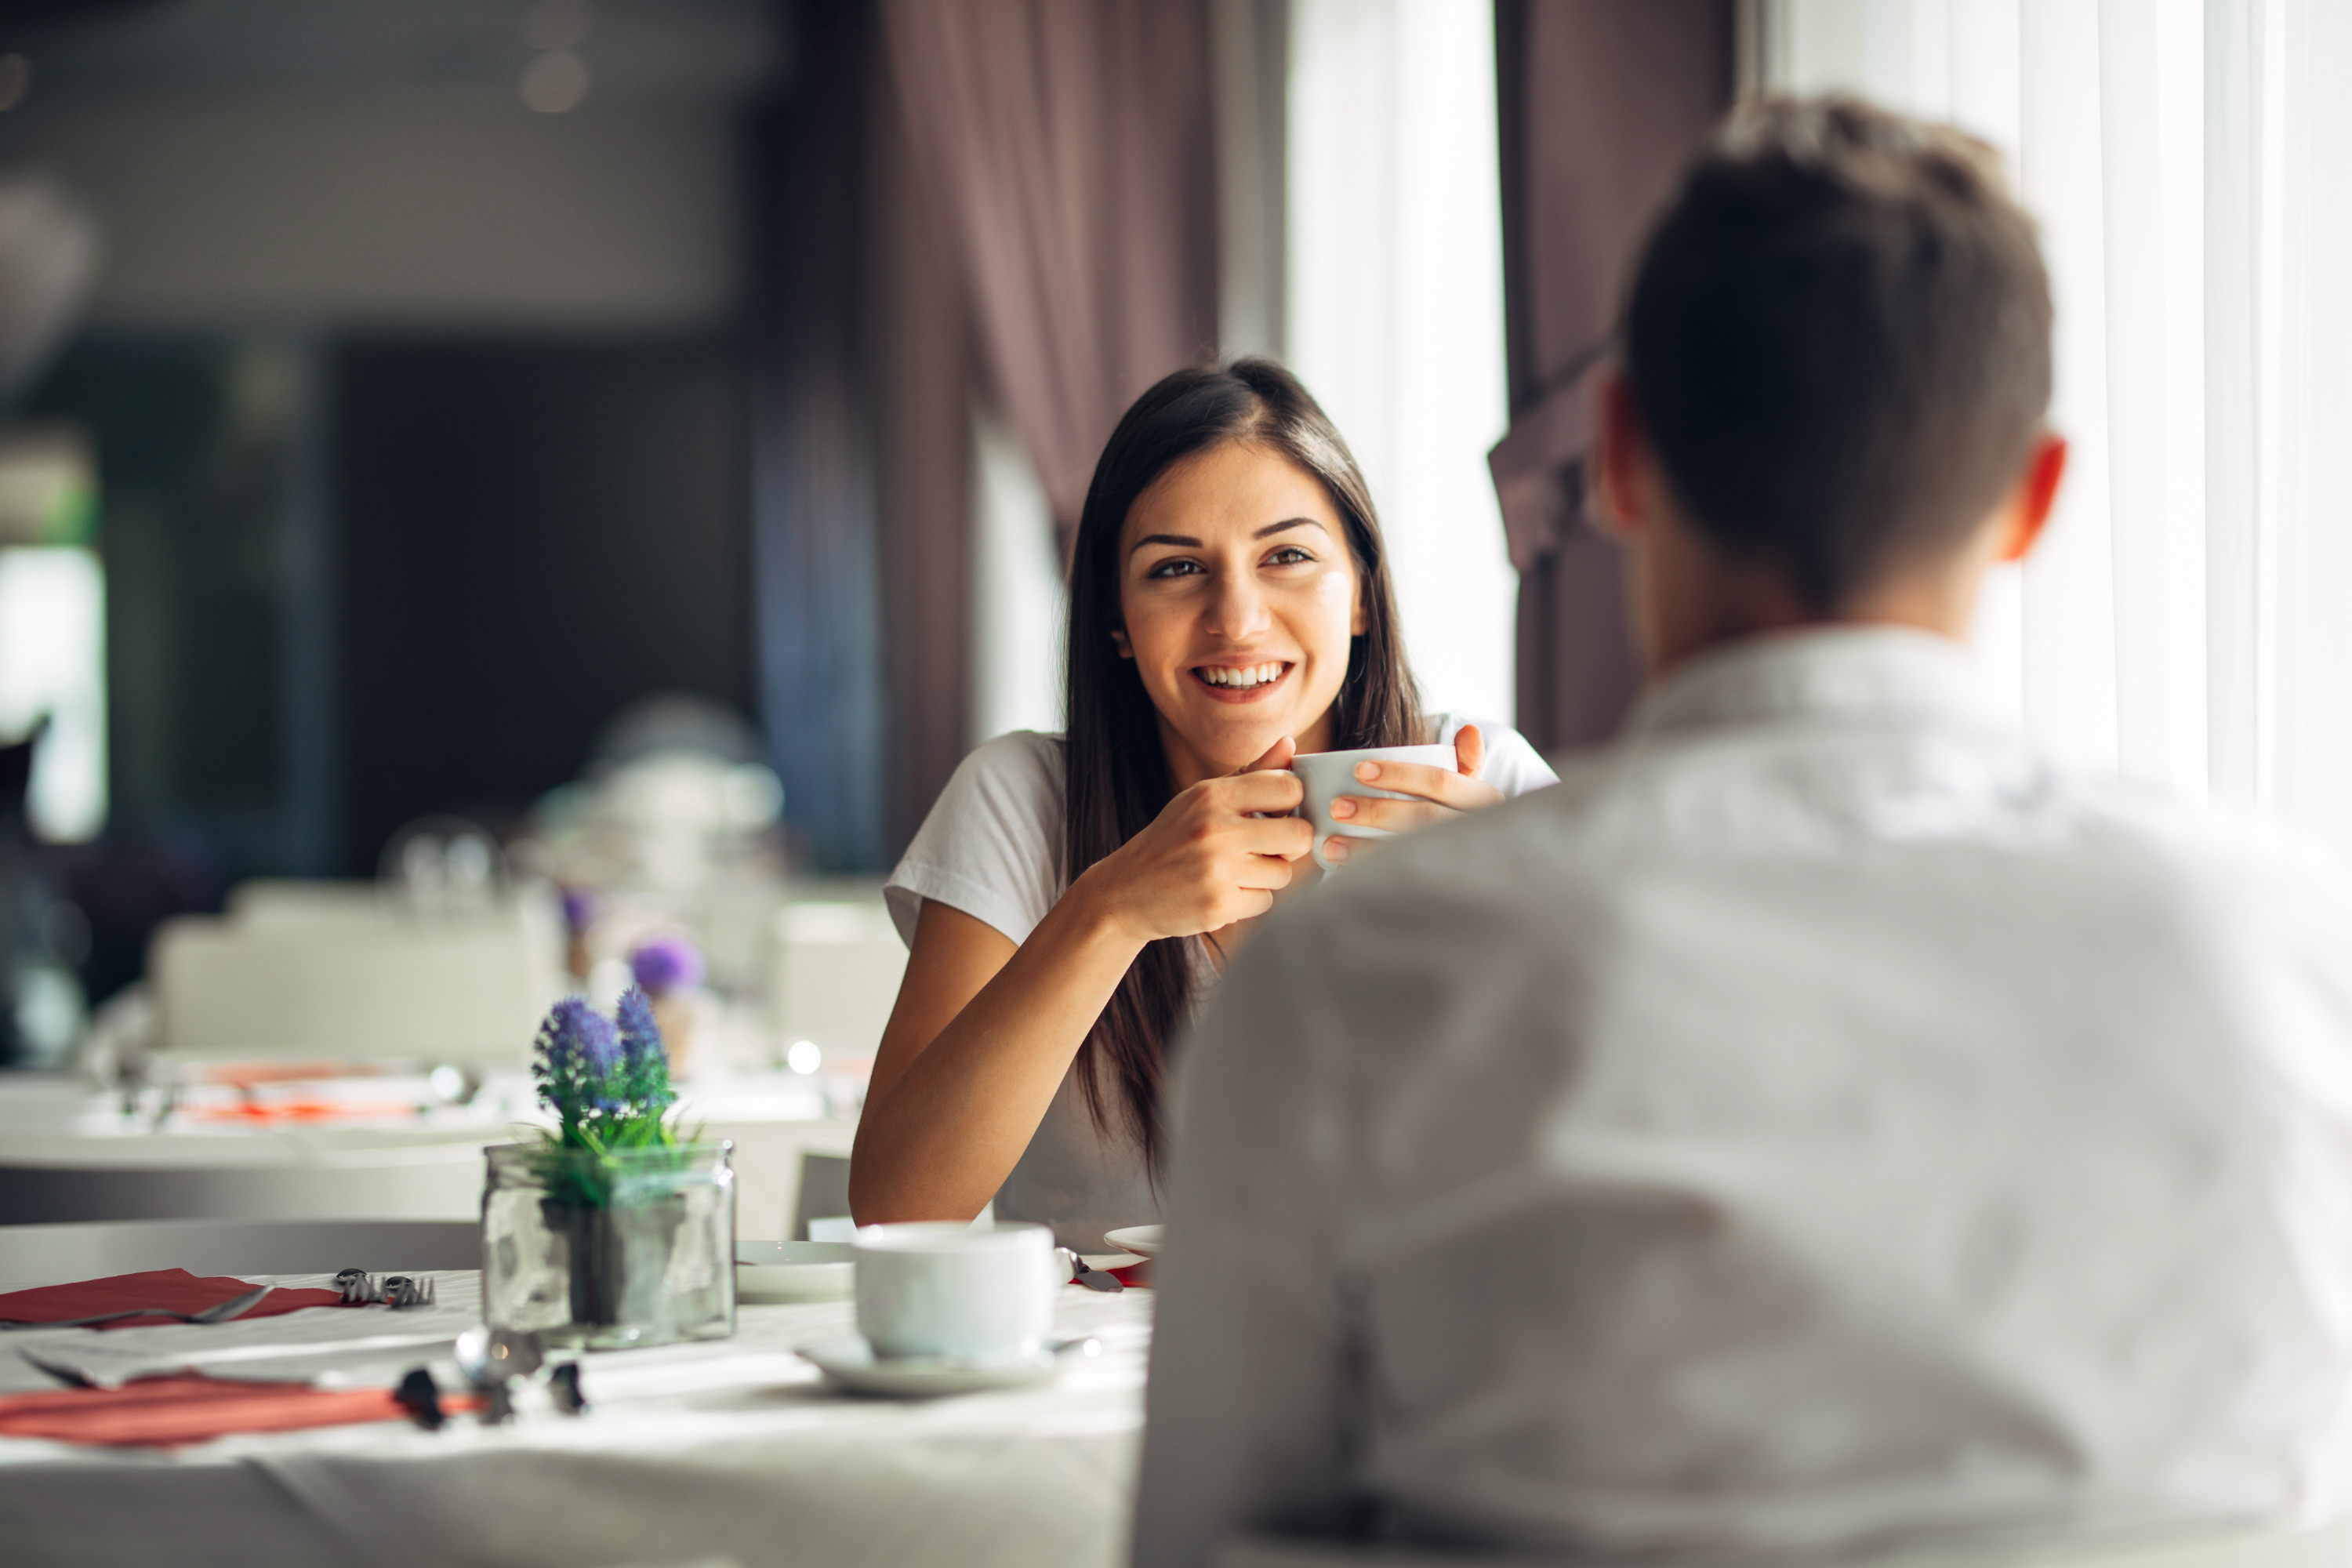 woman smiling while sitting with a coffee cup in her hand facing a man with his back to us on a first date